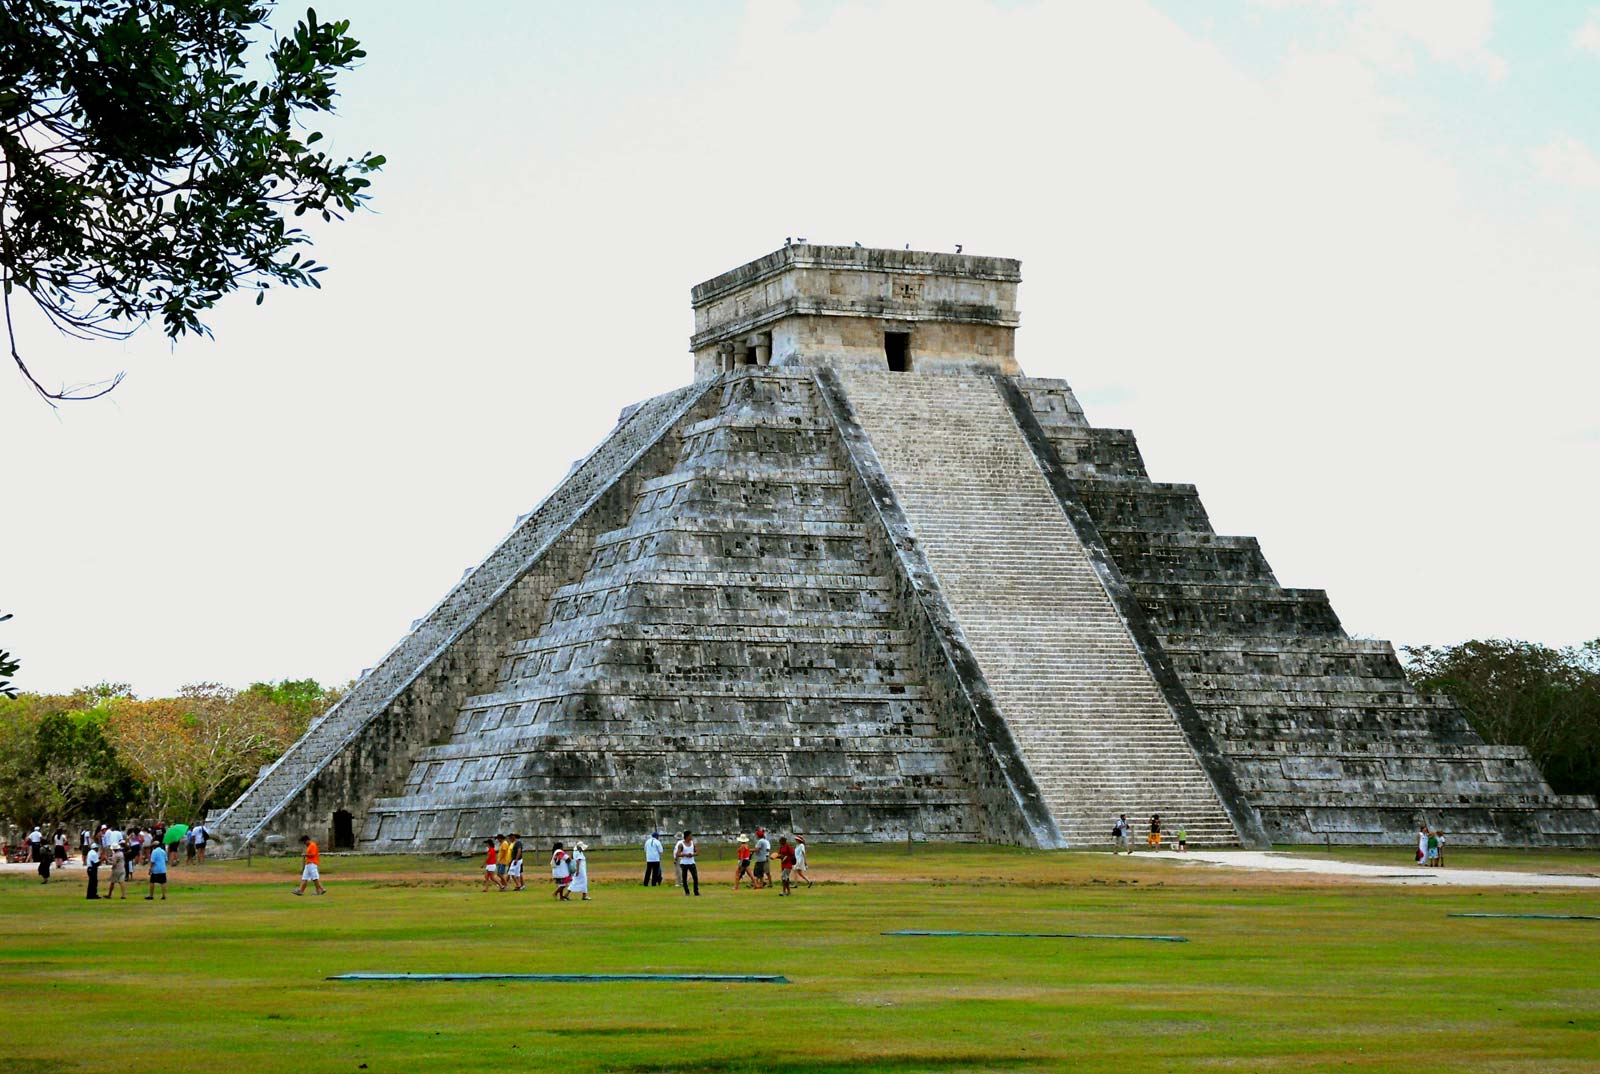 Only 56% Of Adults Can Pass This General Knowledge Test Chichen Itza in Yucatan, Mexico